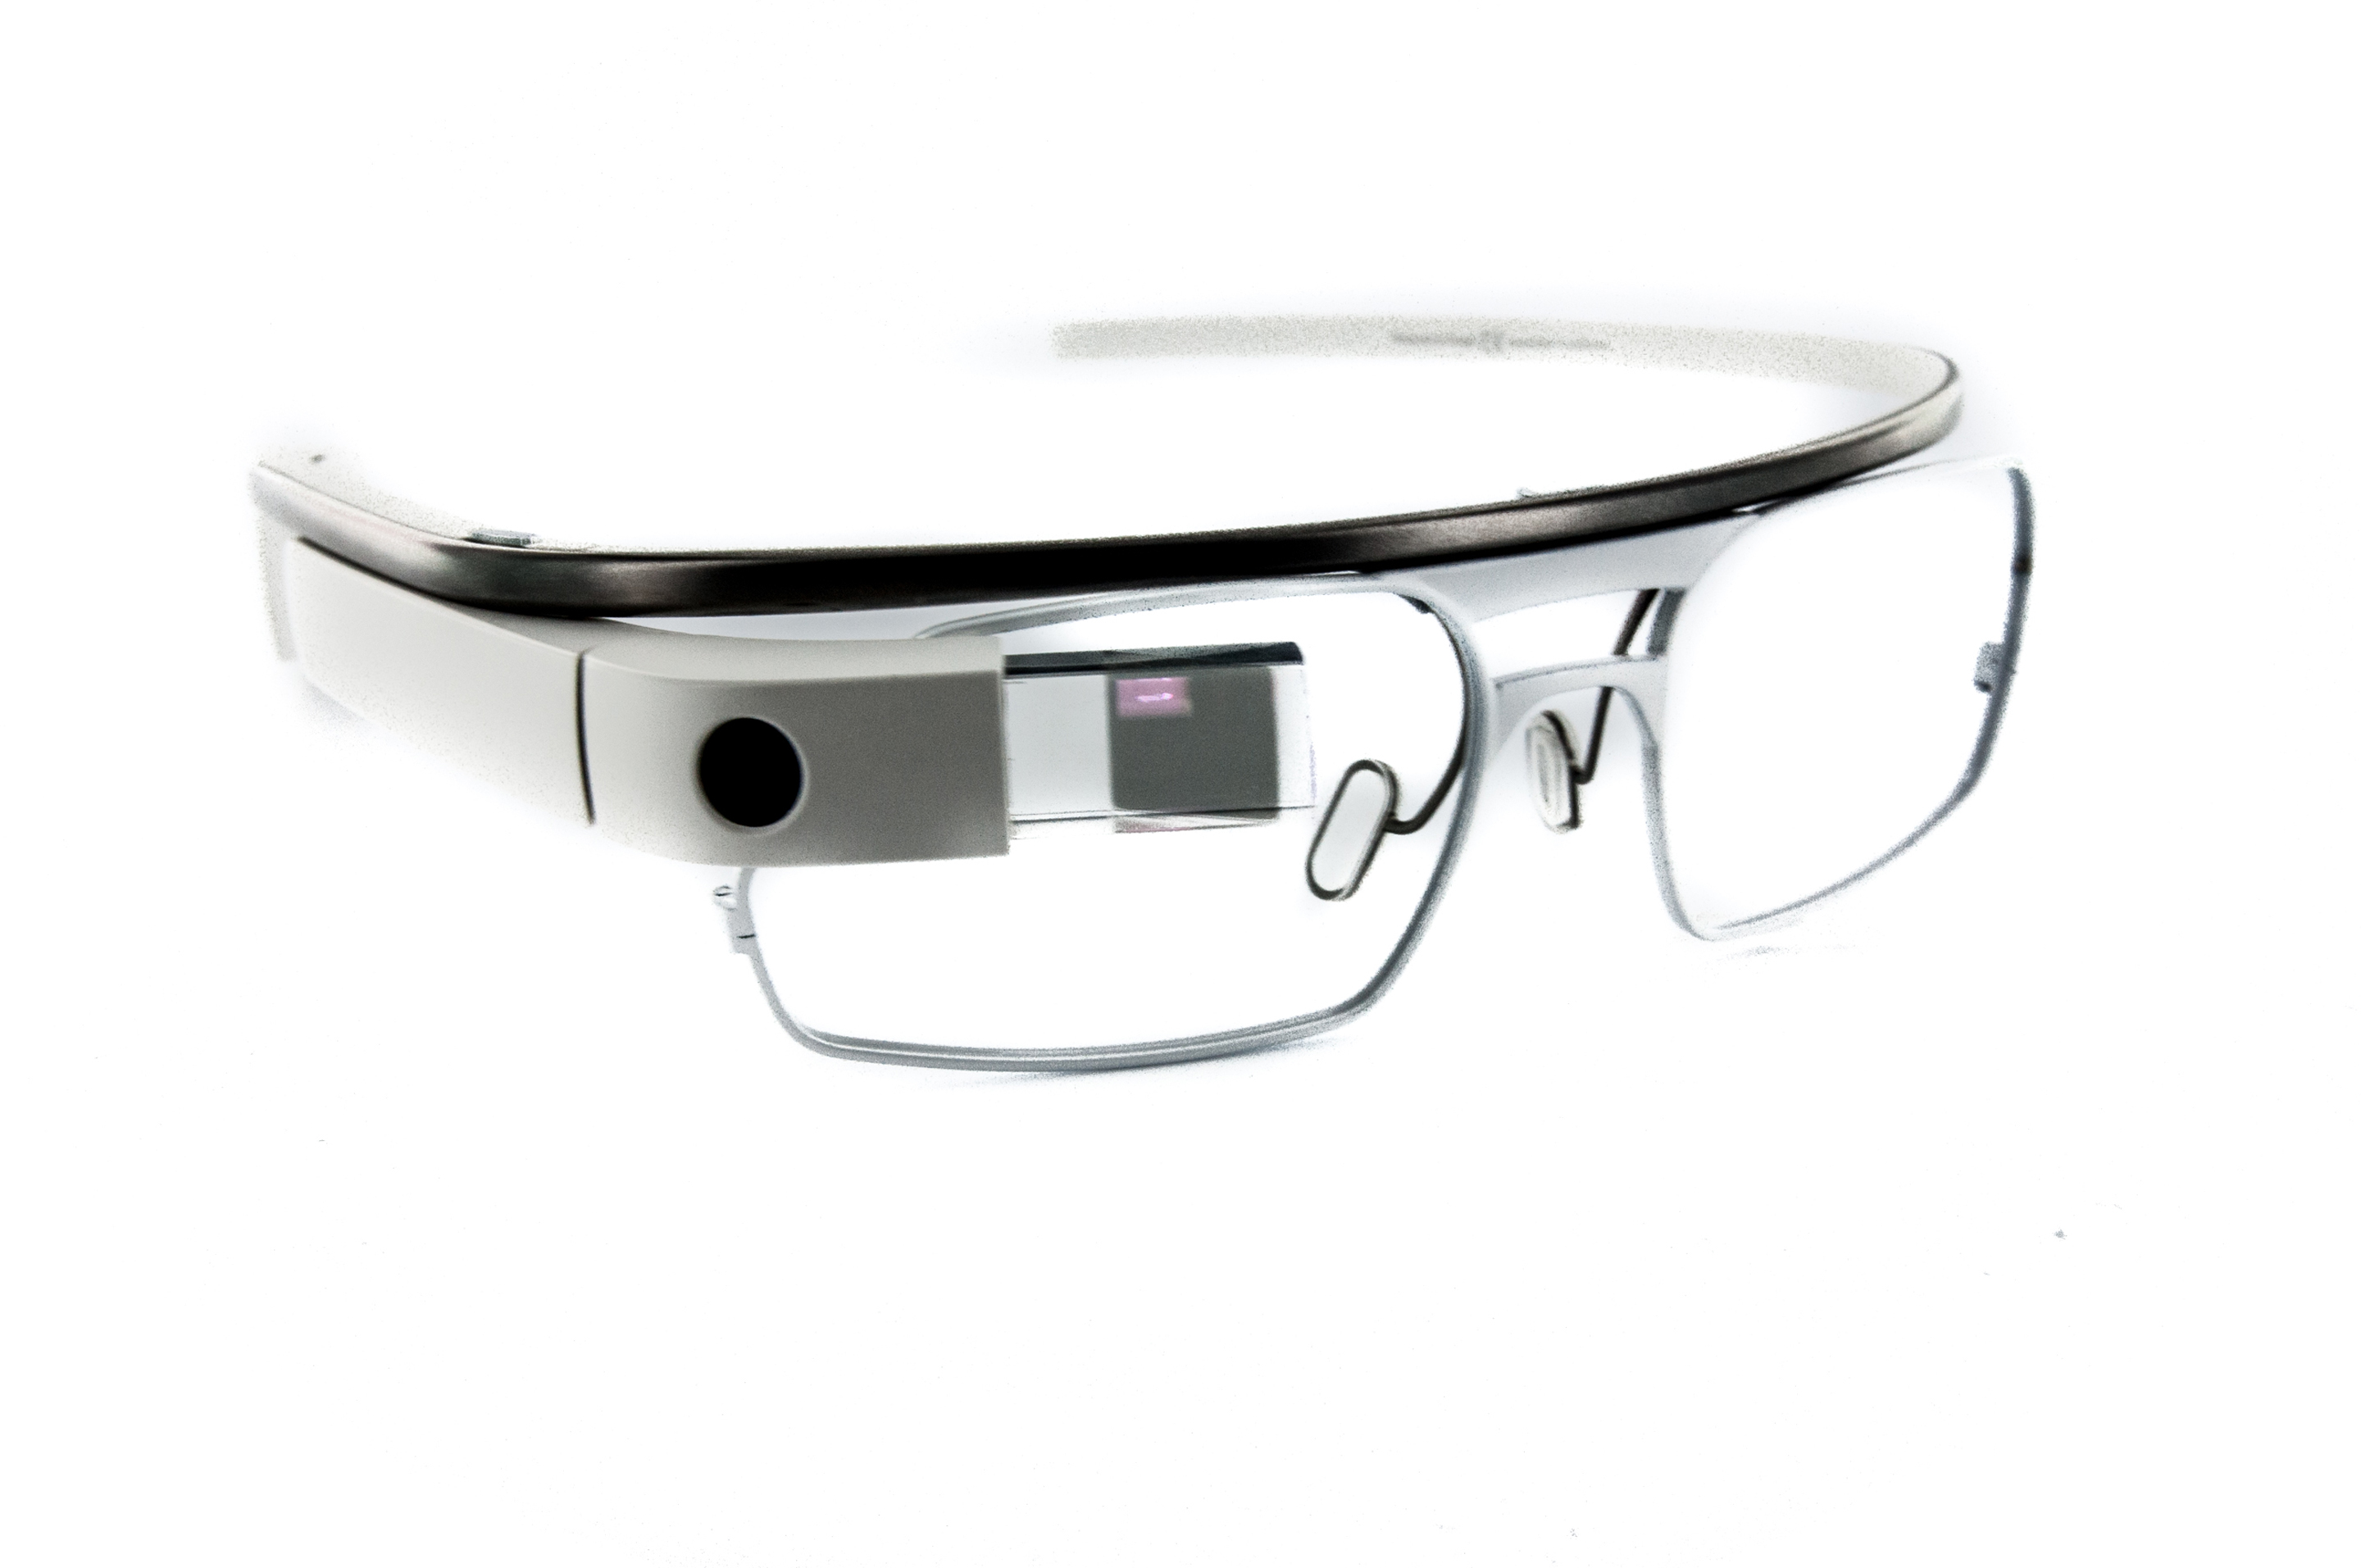 Squaw Valley, CA is Making a Google Glass App for Skiing: - SnowBrains